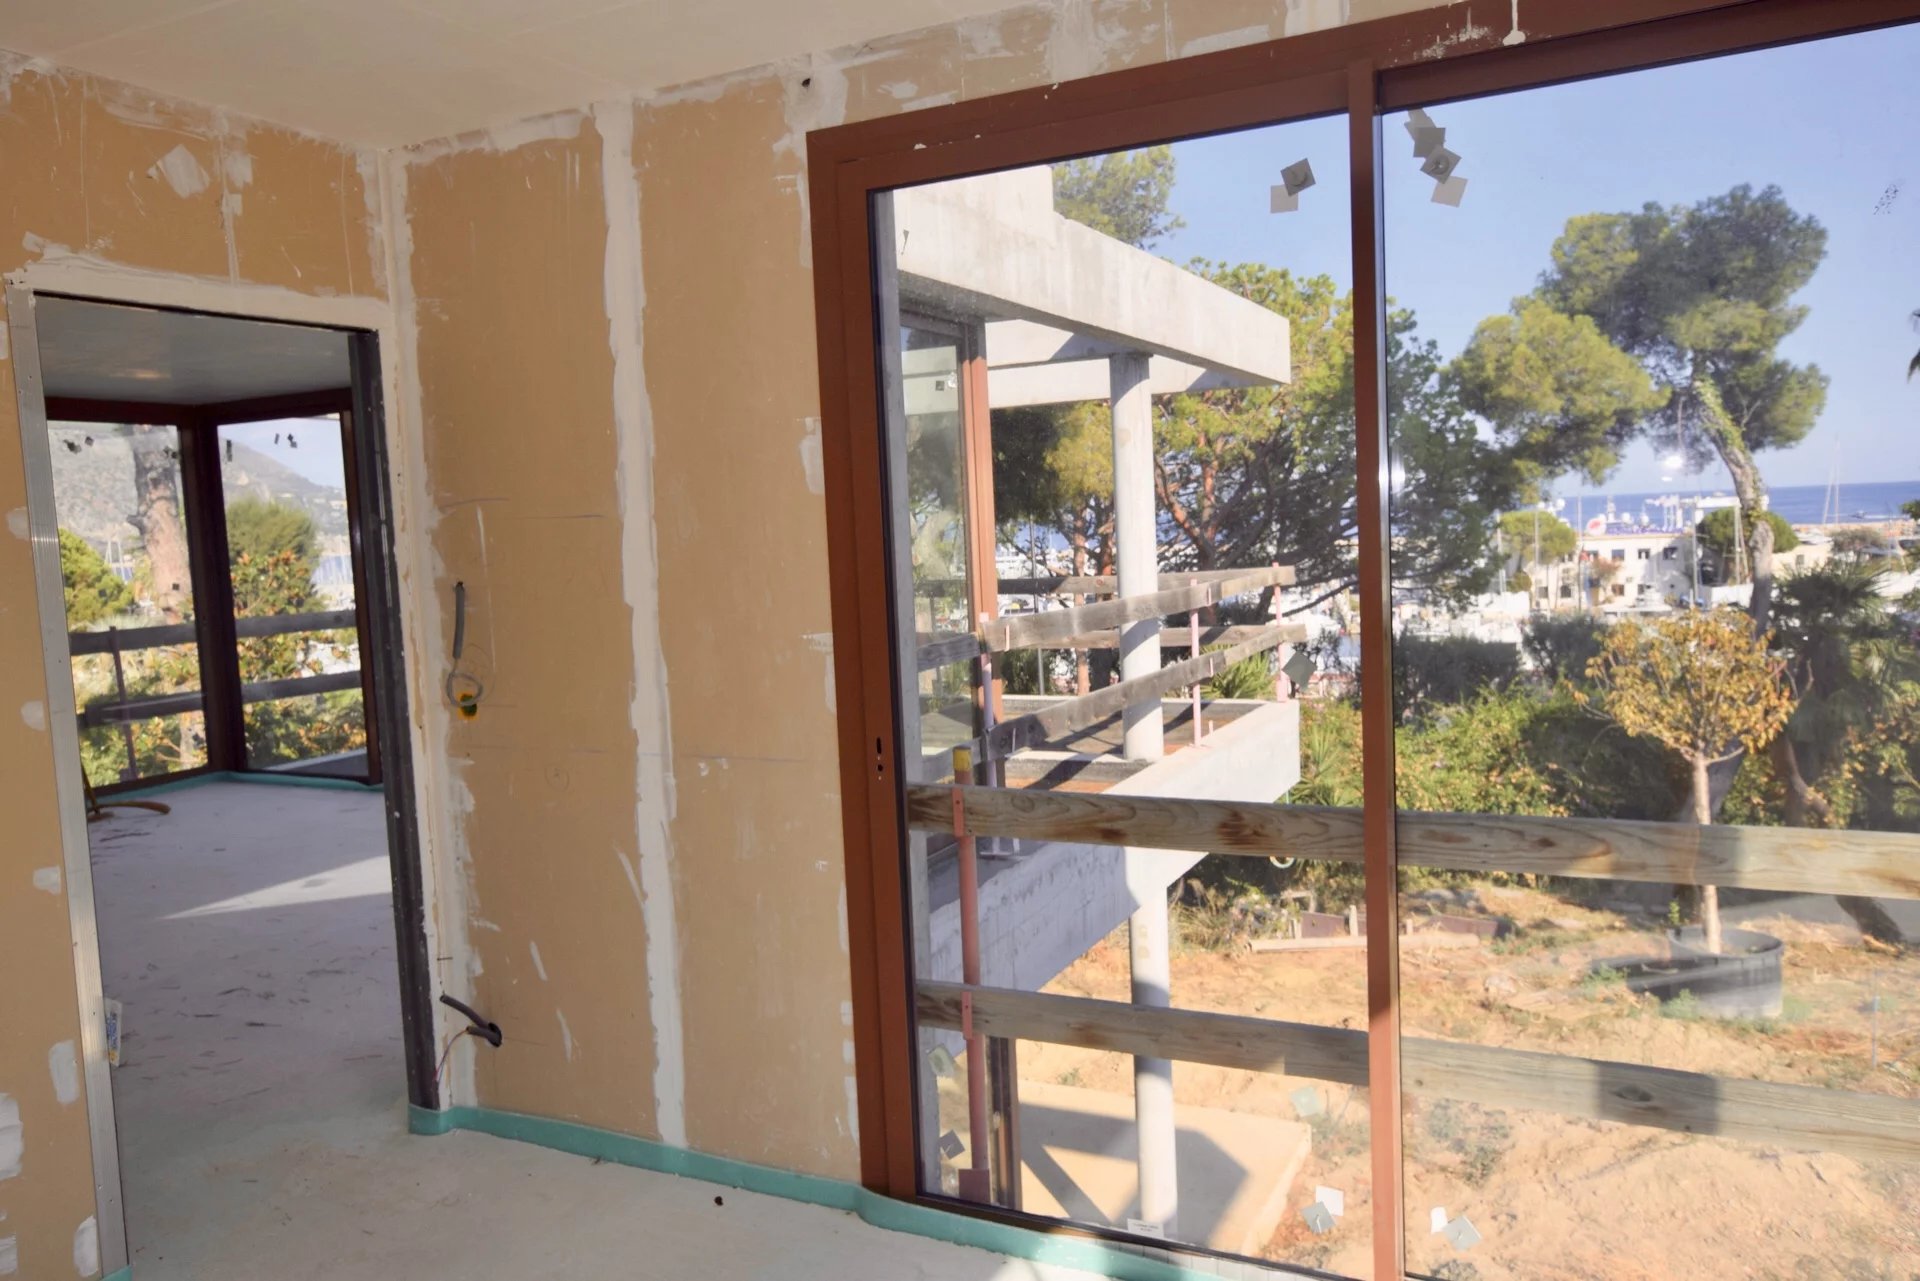 Project in Progress to Complete For Sale in Beaulieu-sur-Mer France